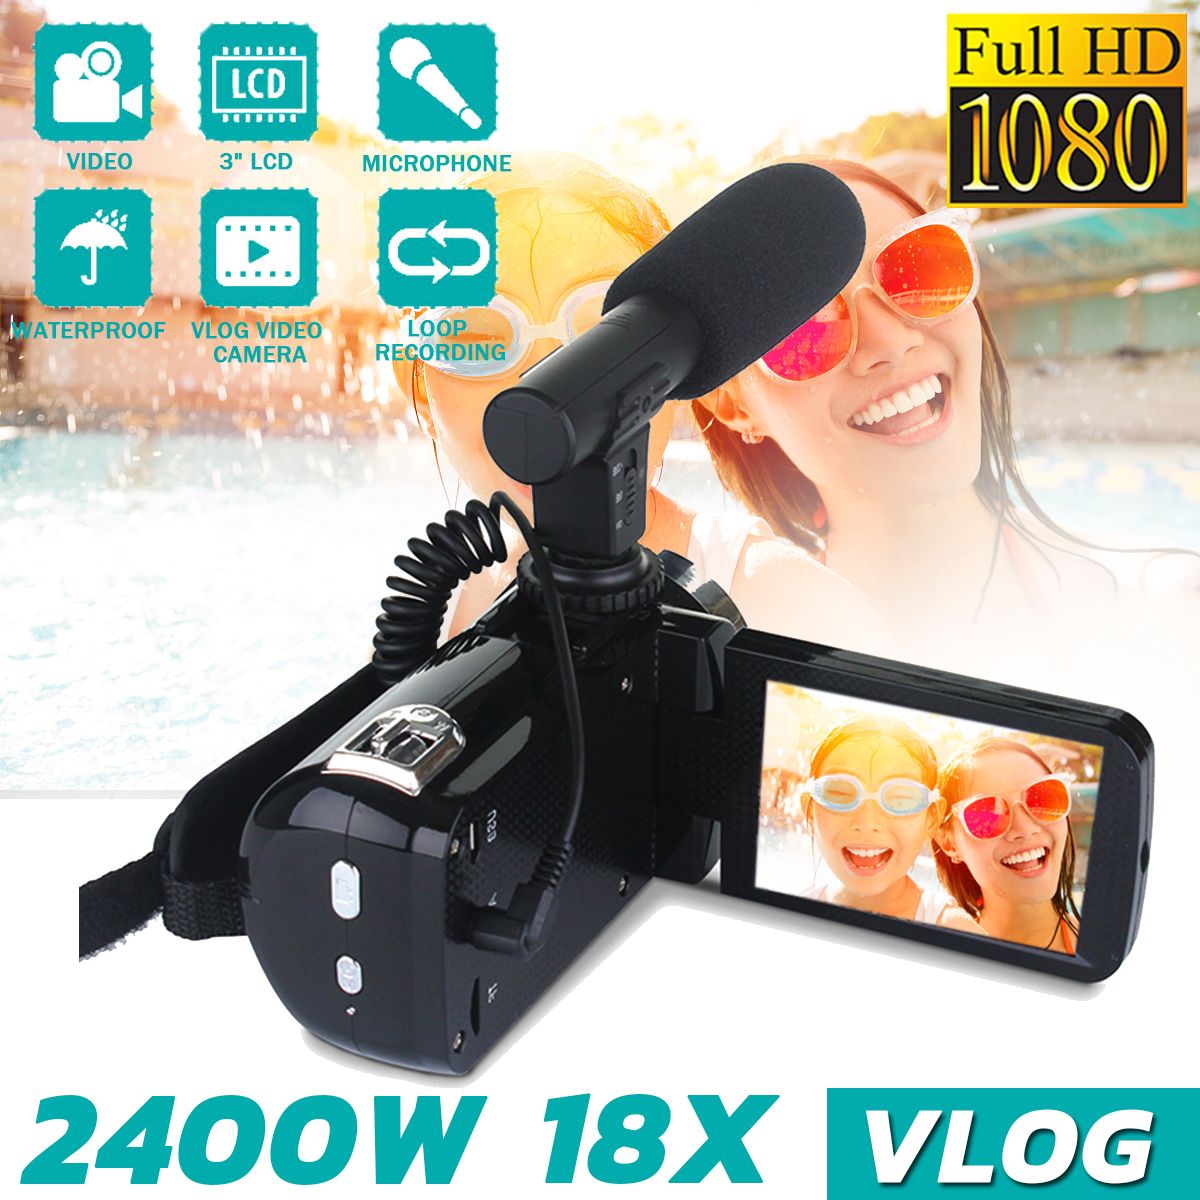 DC888-24MP-HD-Camcorder-18x-Digital-Zoom-Video-Camera-for-Youtube-Live-Vlog-Night-Vision-3-Inch-LCD--1719862